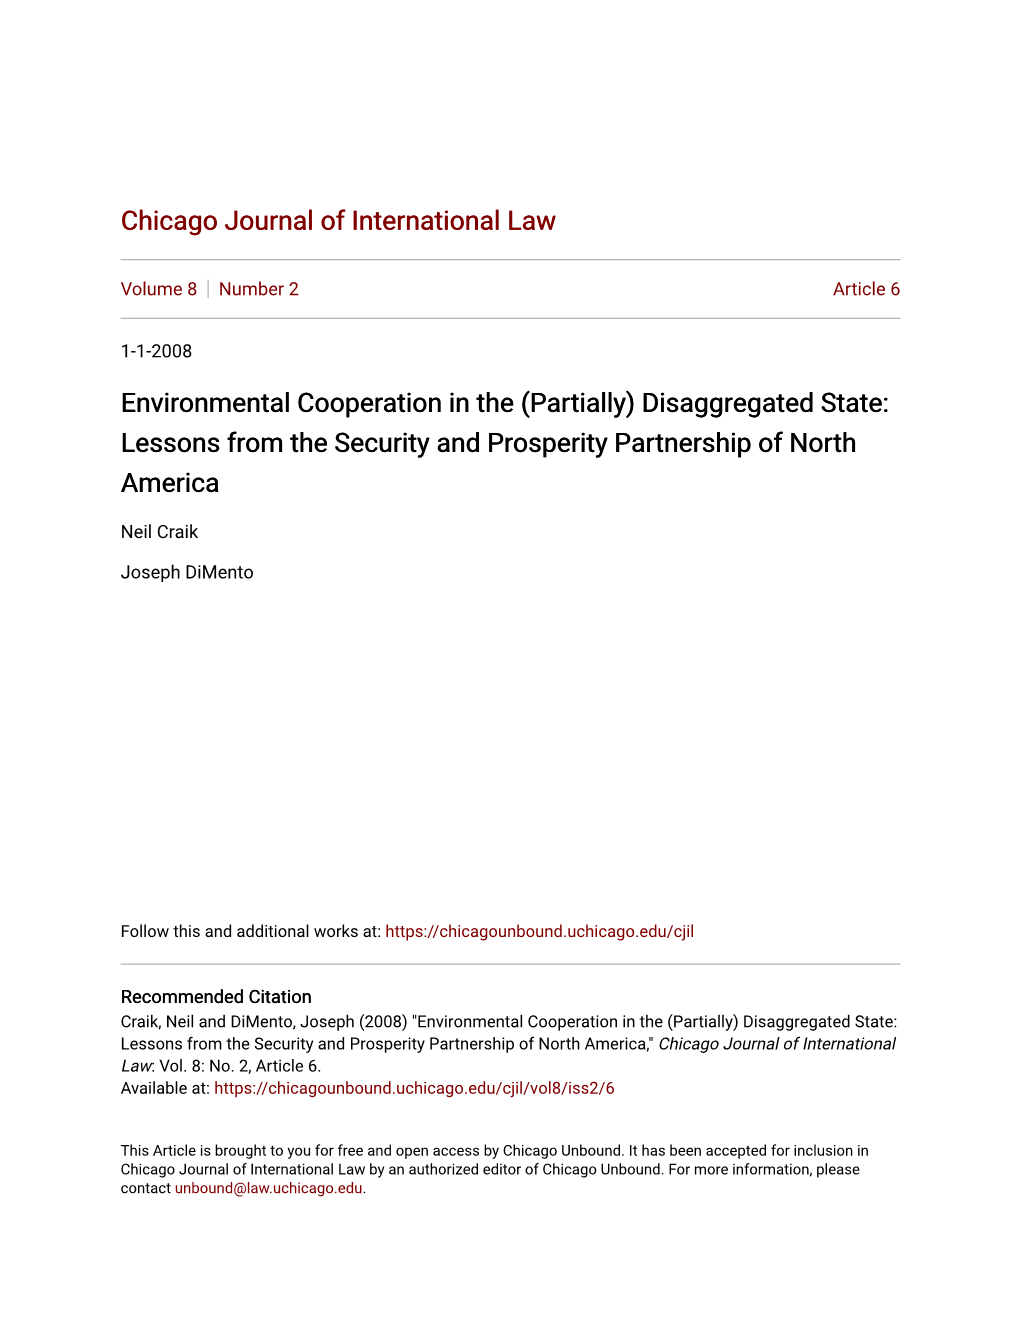 Environmental Cooperation in the (Partially) Disaggregated State: Lessons from the Security and Prosperity Partnership of North America